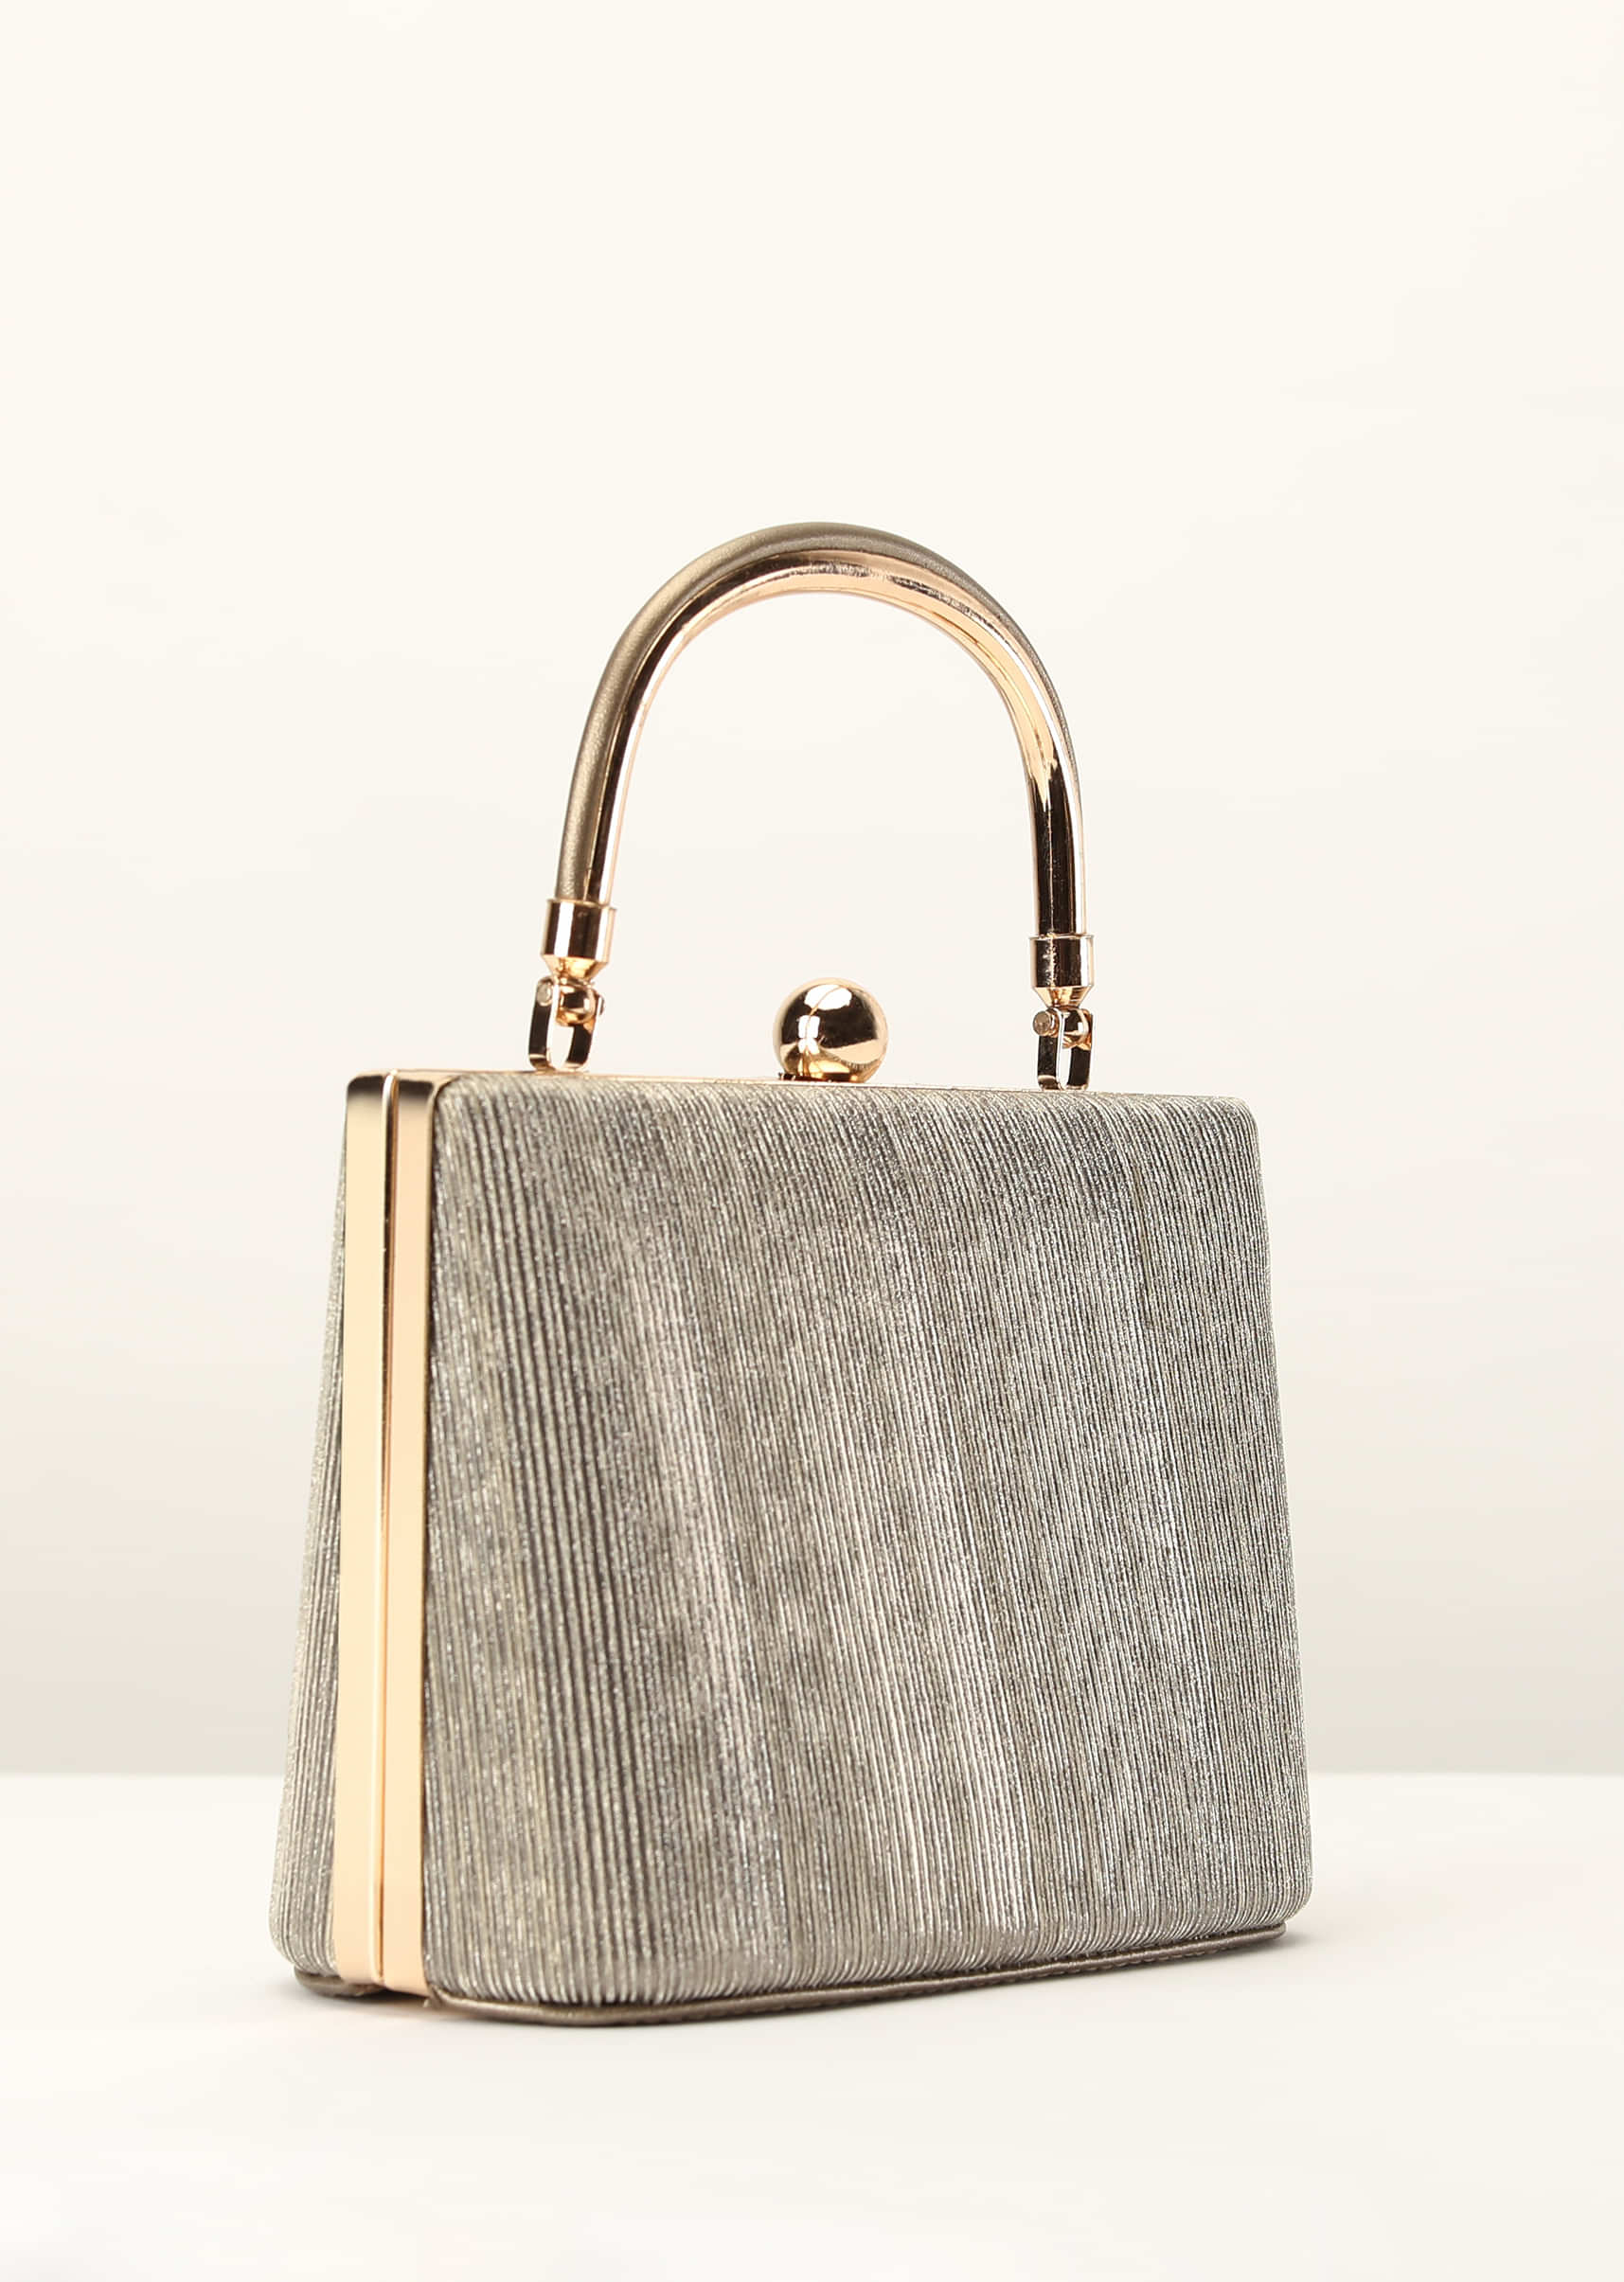 Silver Gold Clutch In Crush Fabric With Metal Handle And Clasp Closure